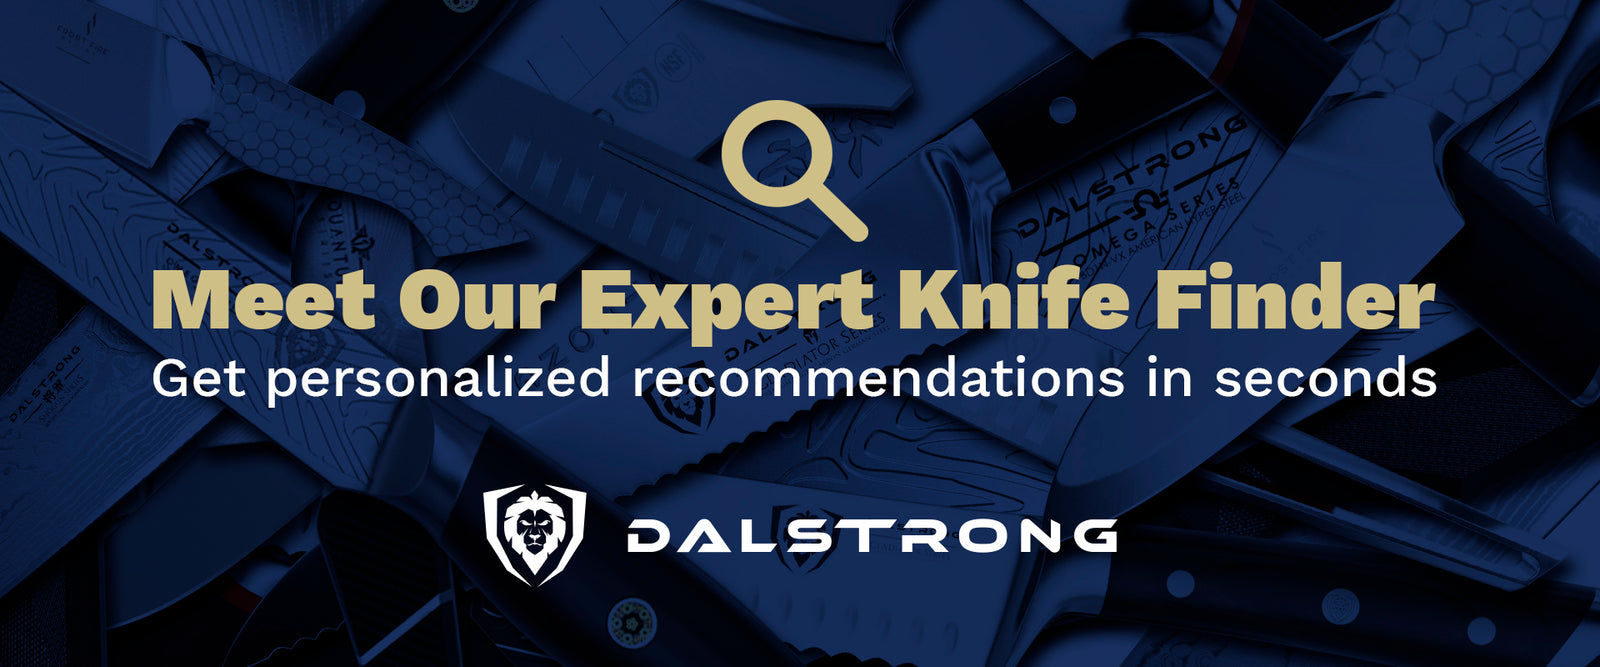 Blue background with gold letters promoting Dalstrong's expert knife finder quiz